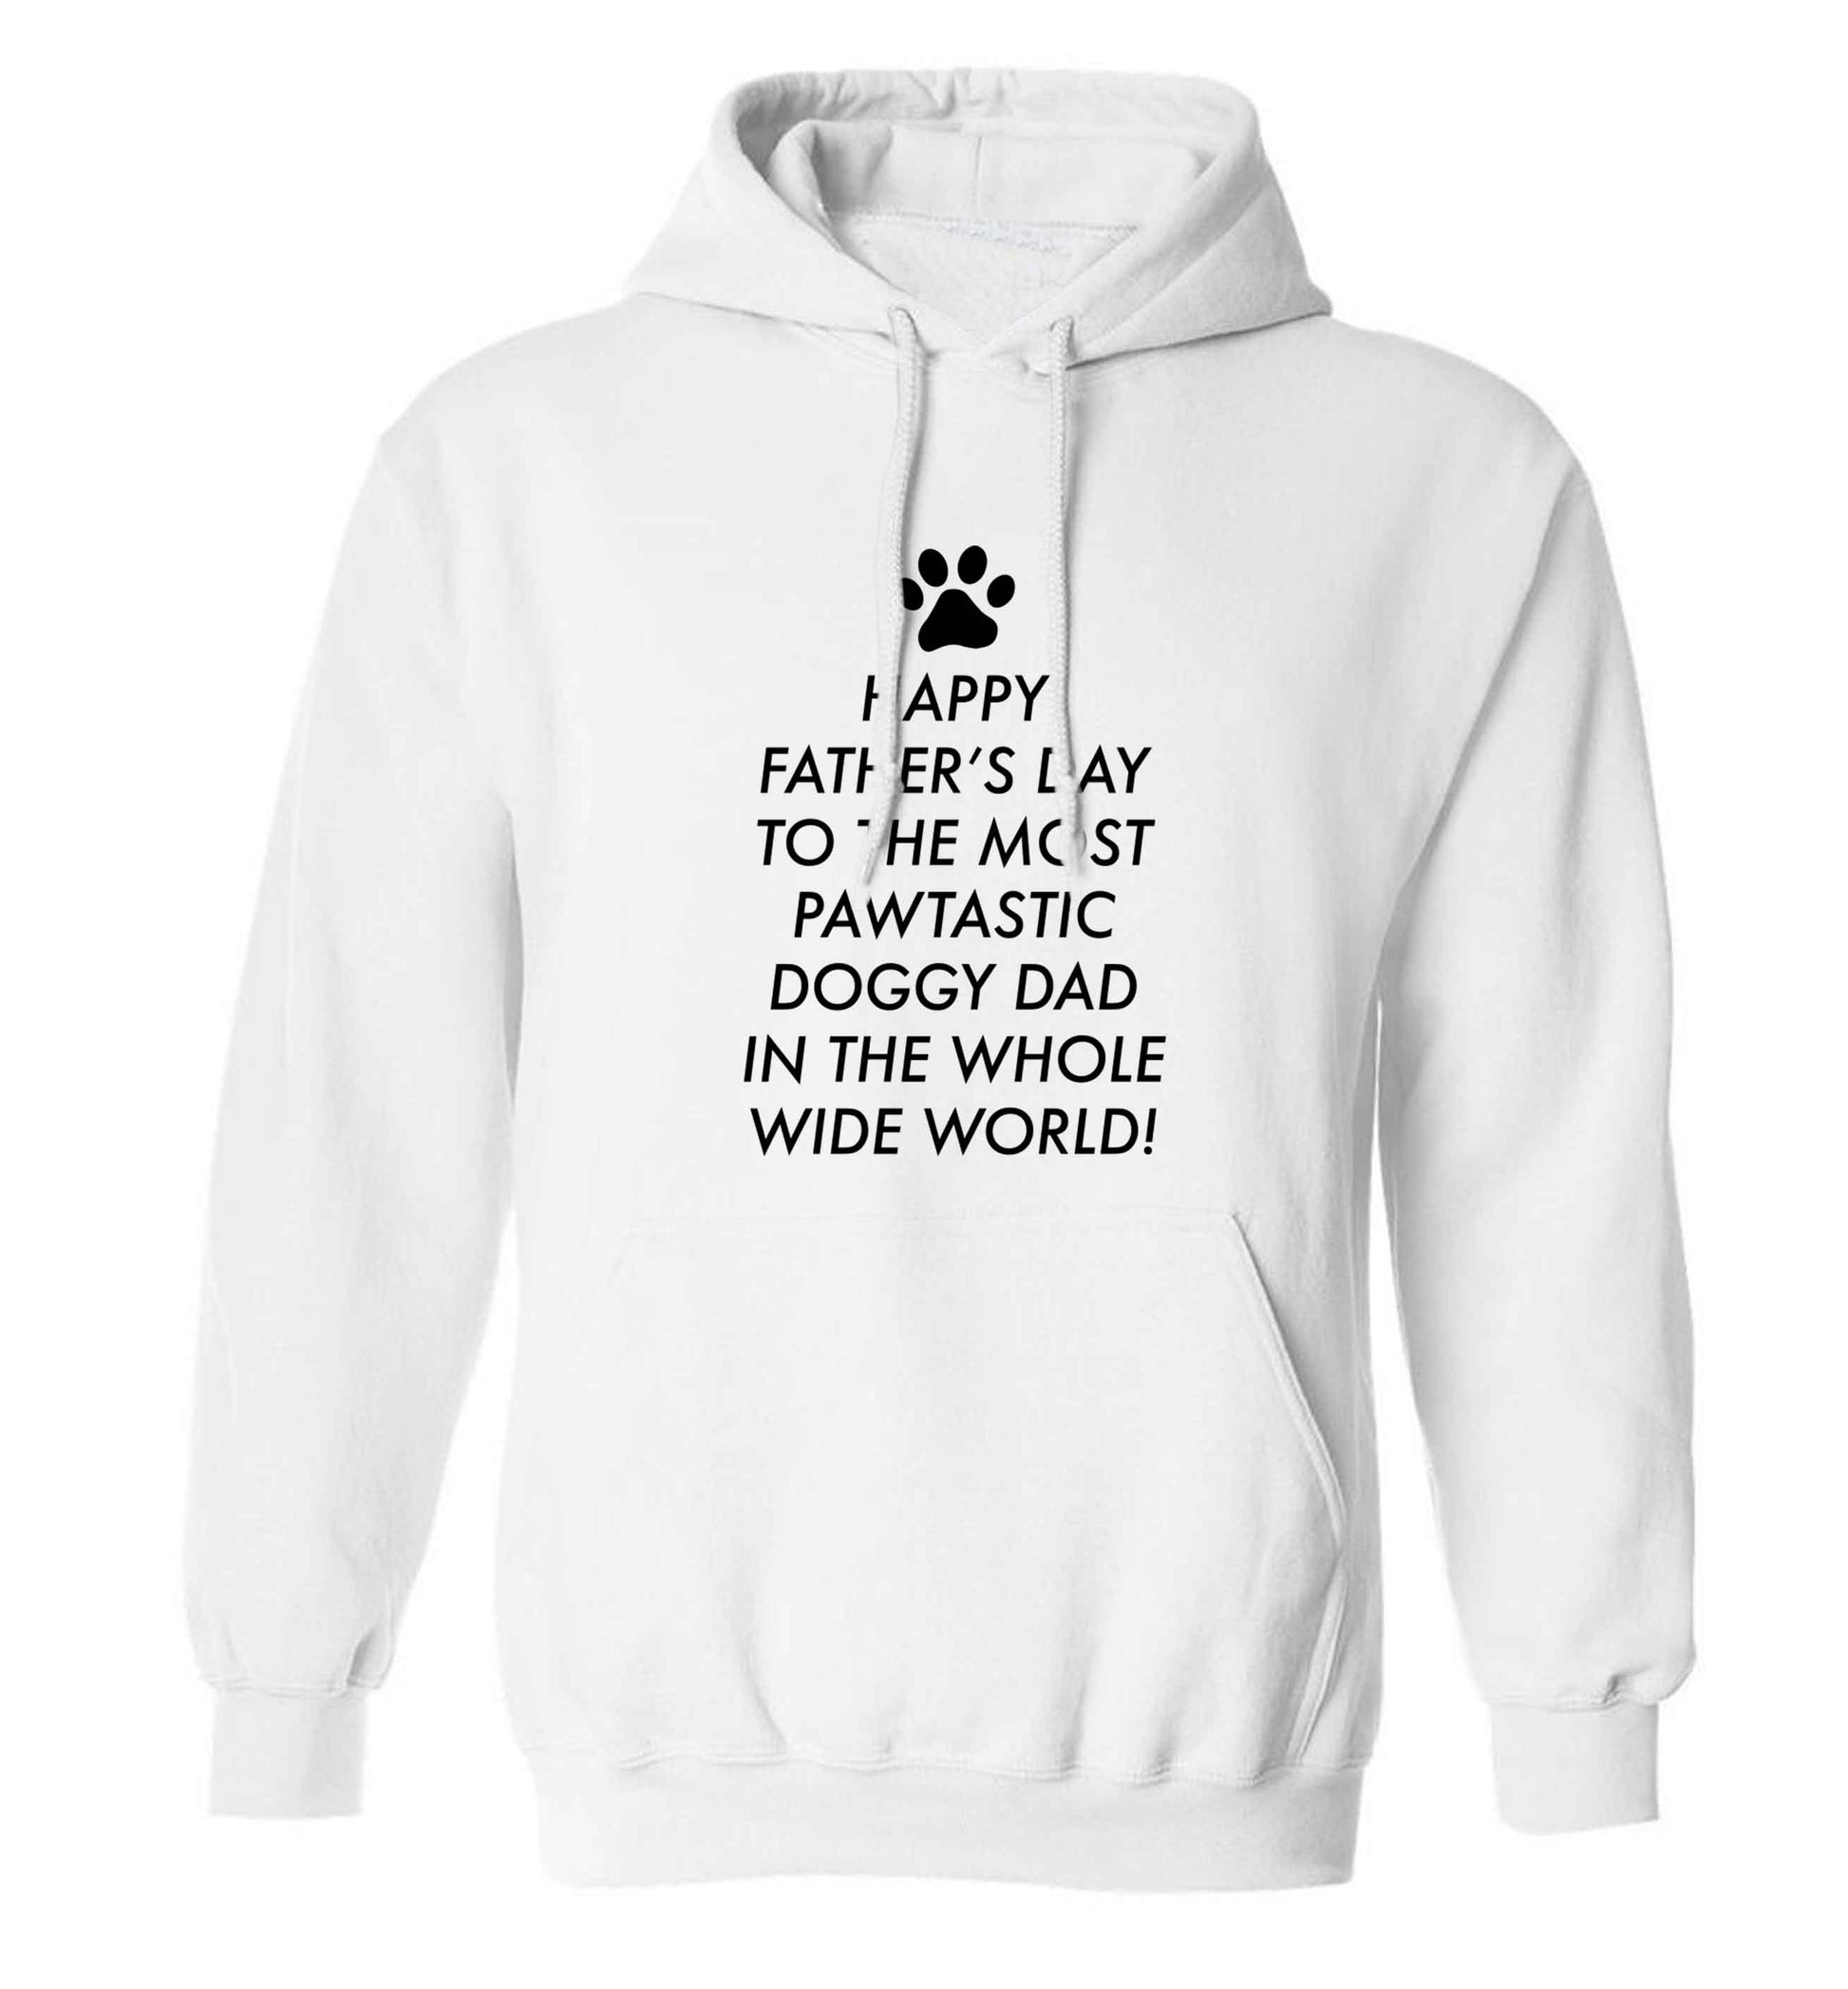 Happy Father's day to the most pawtastic doggy dad in the whole wide world!adults unisex white hoodie 2XL